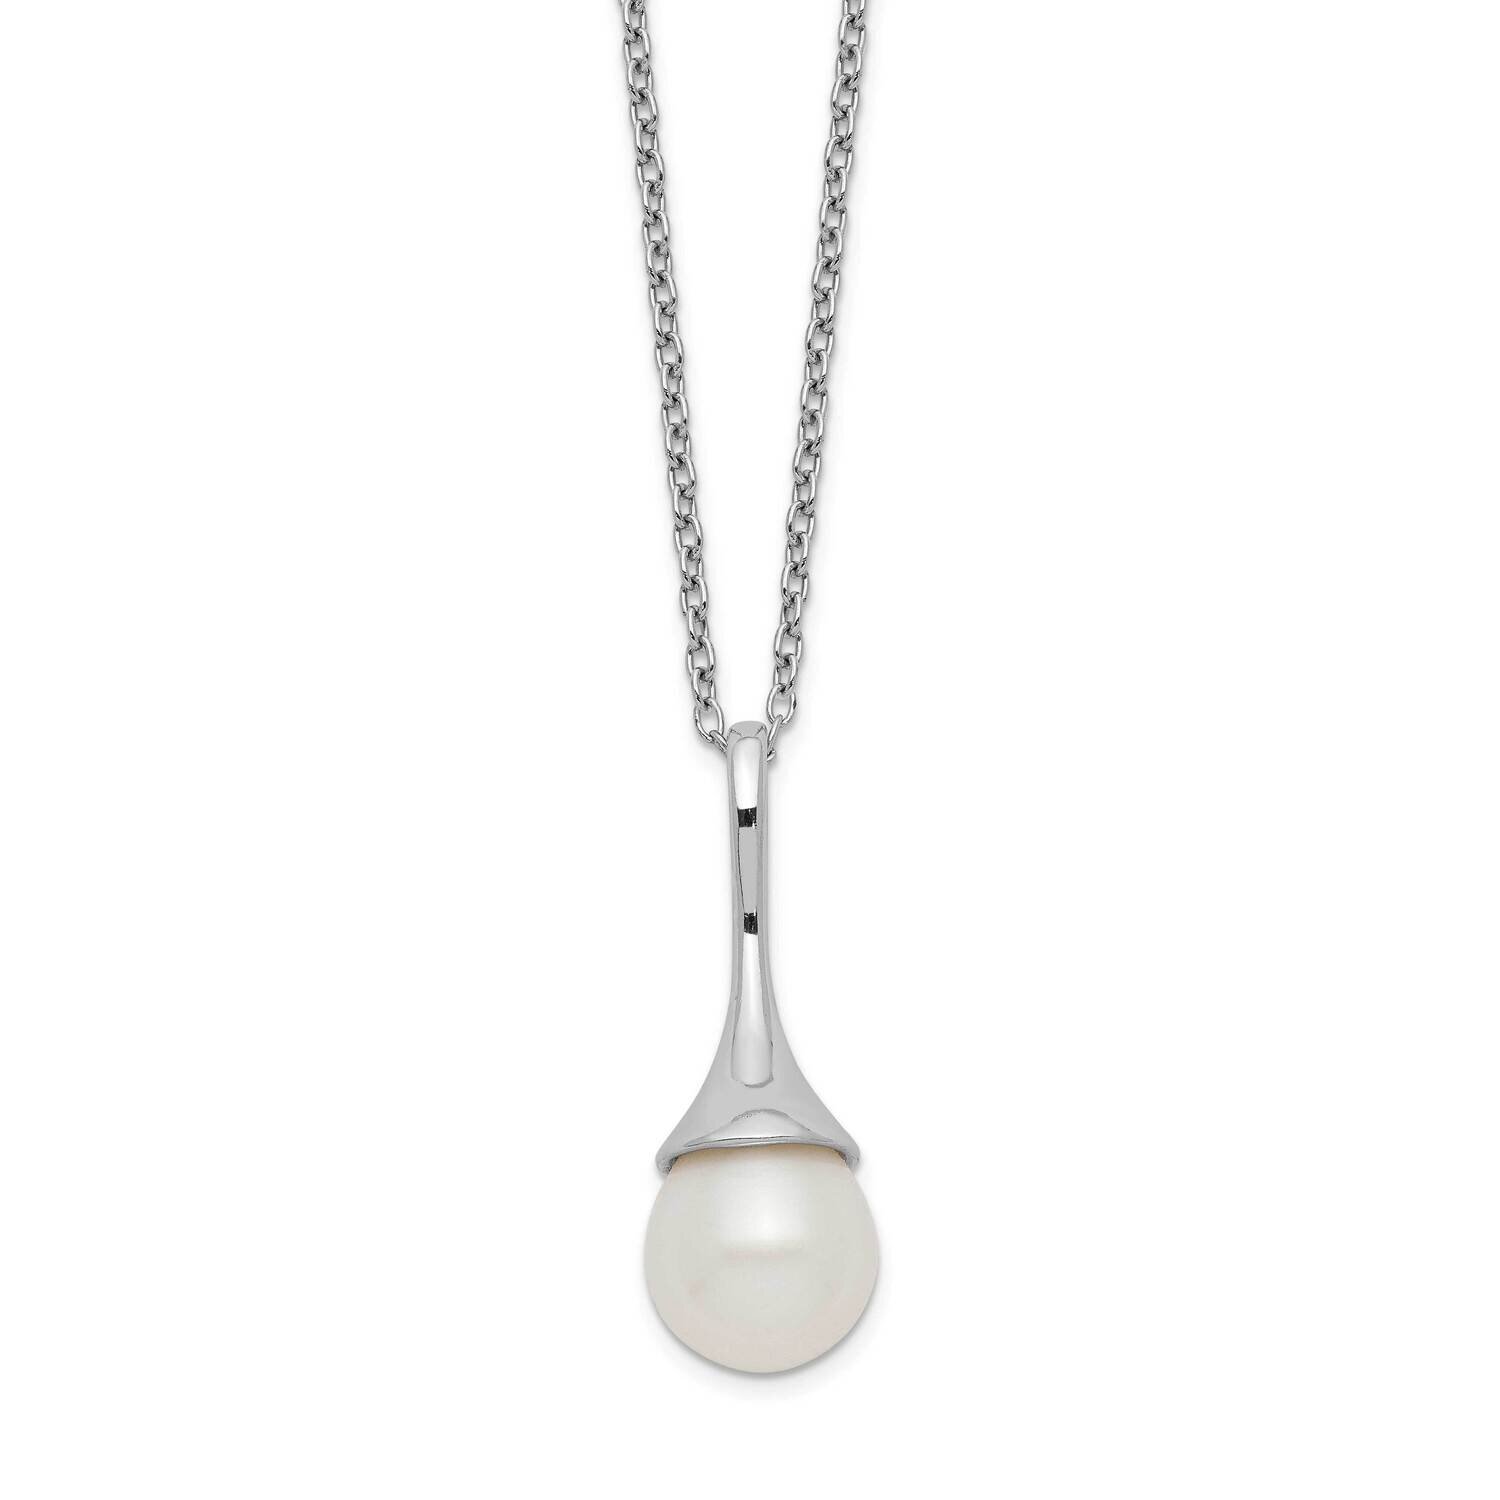 8-9mm White Rice Fwc Pearl Necklace Sterling Silver Rhodium-plated QH5494-17